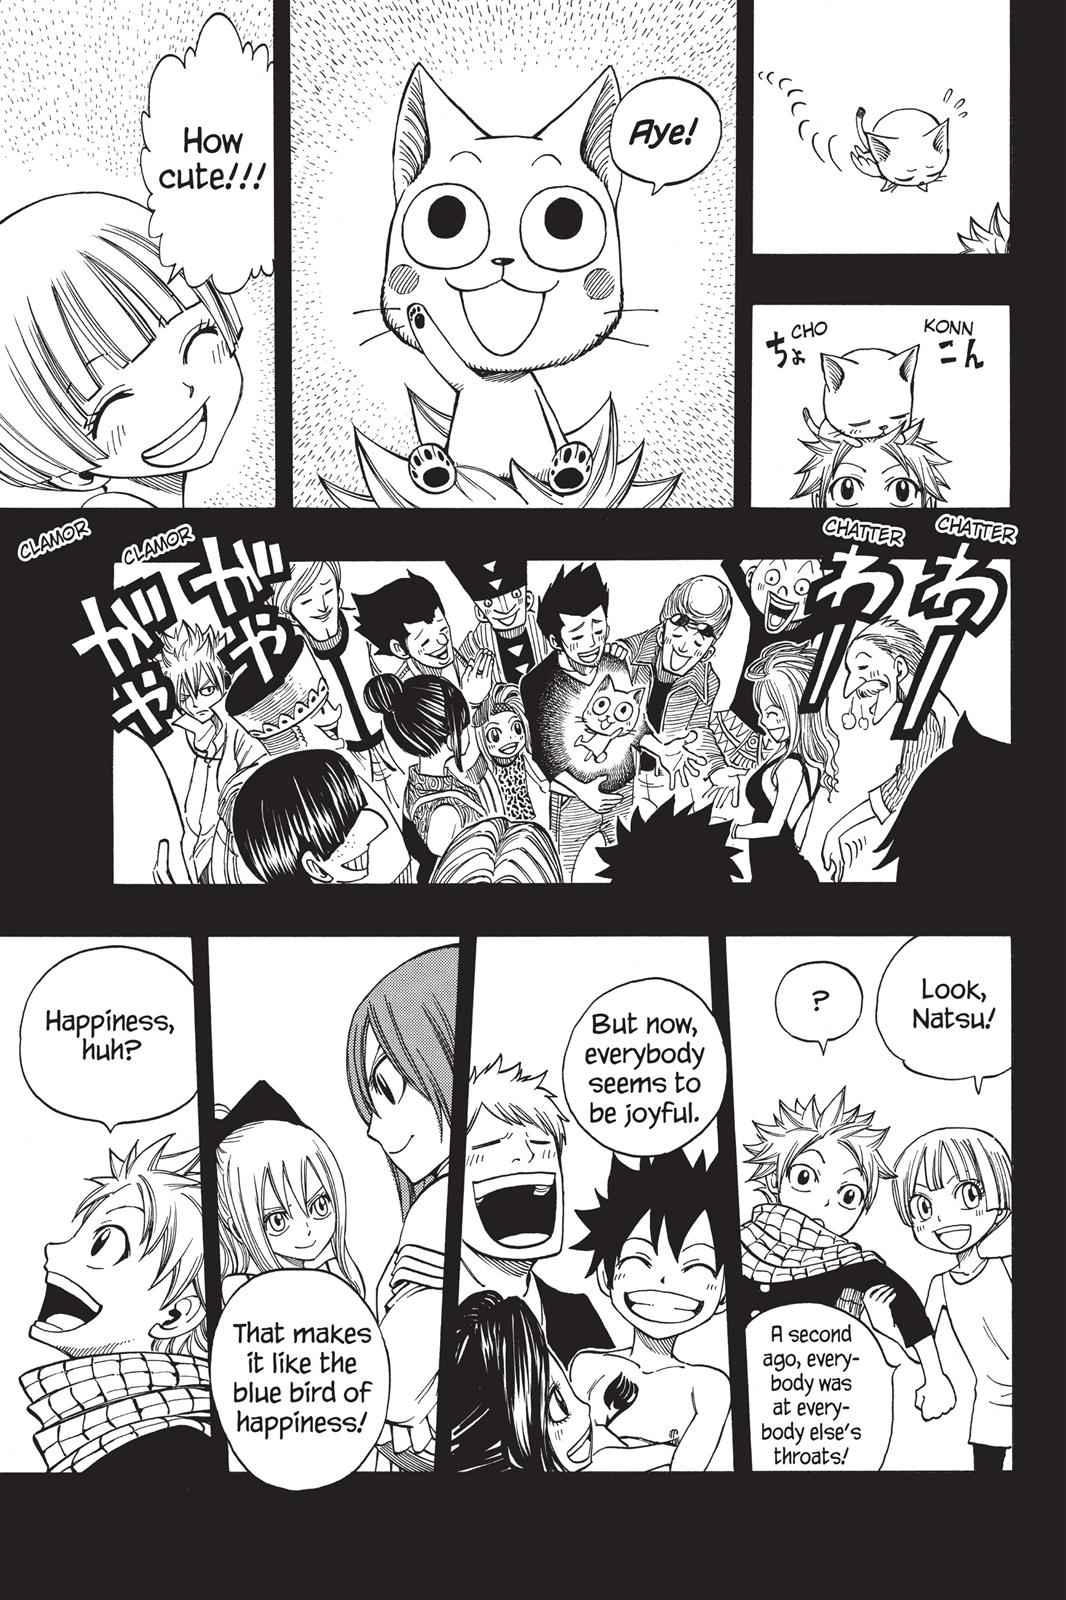  Chapter 126.5 image 022